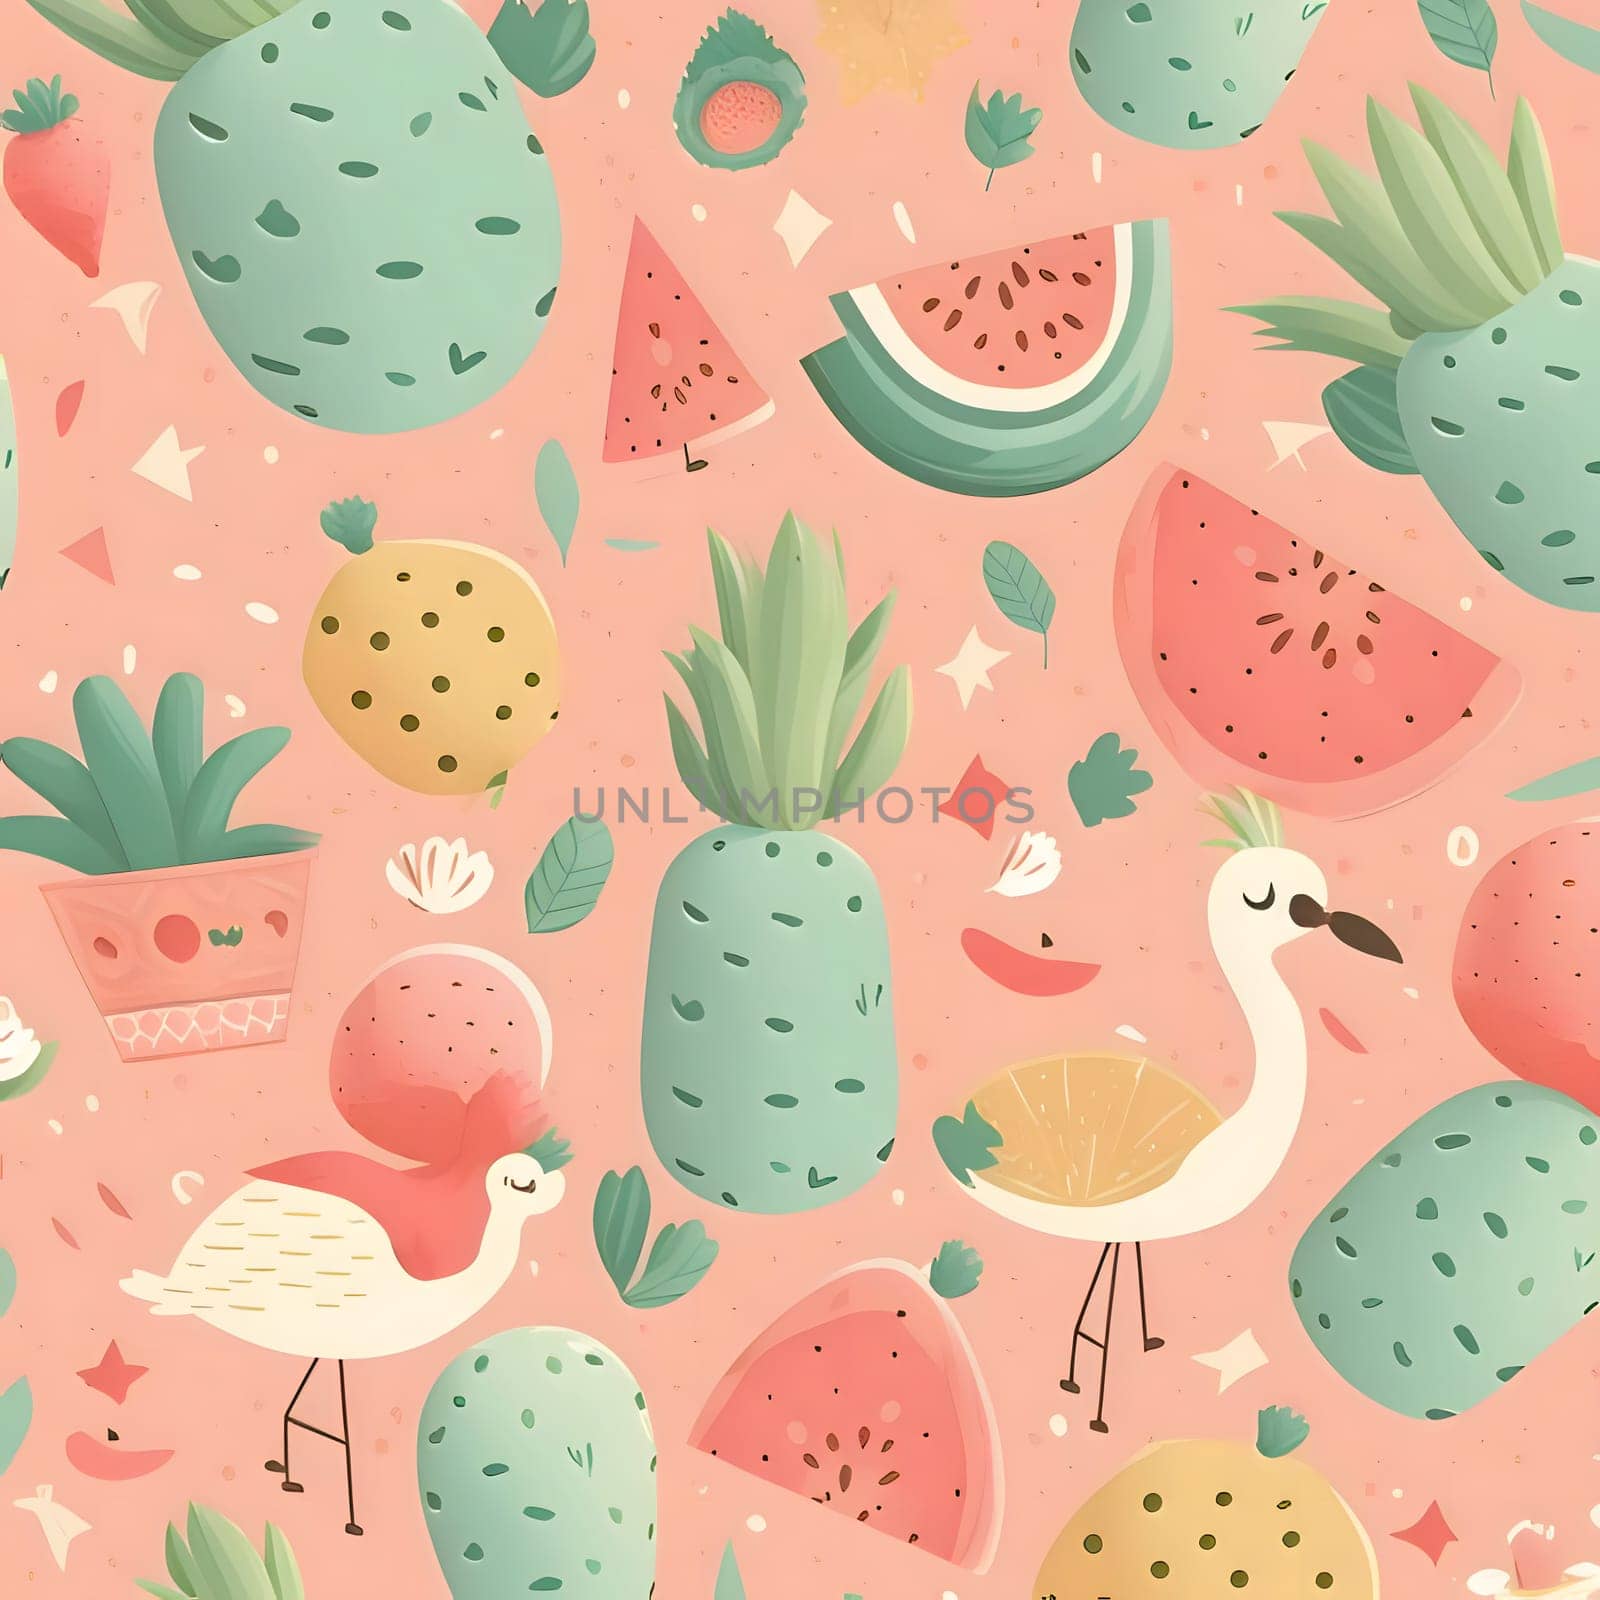 Patterns and banners backgrounds: Seamless pattern with watermelon, pineapple and flamingo.